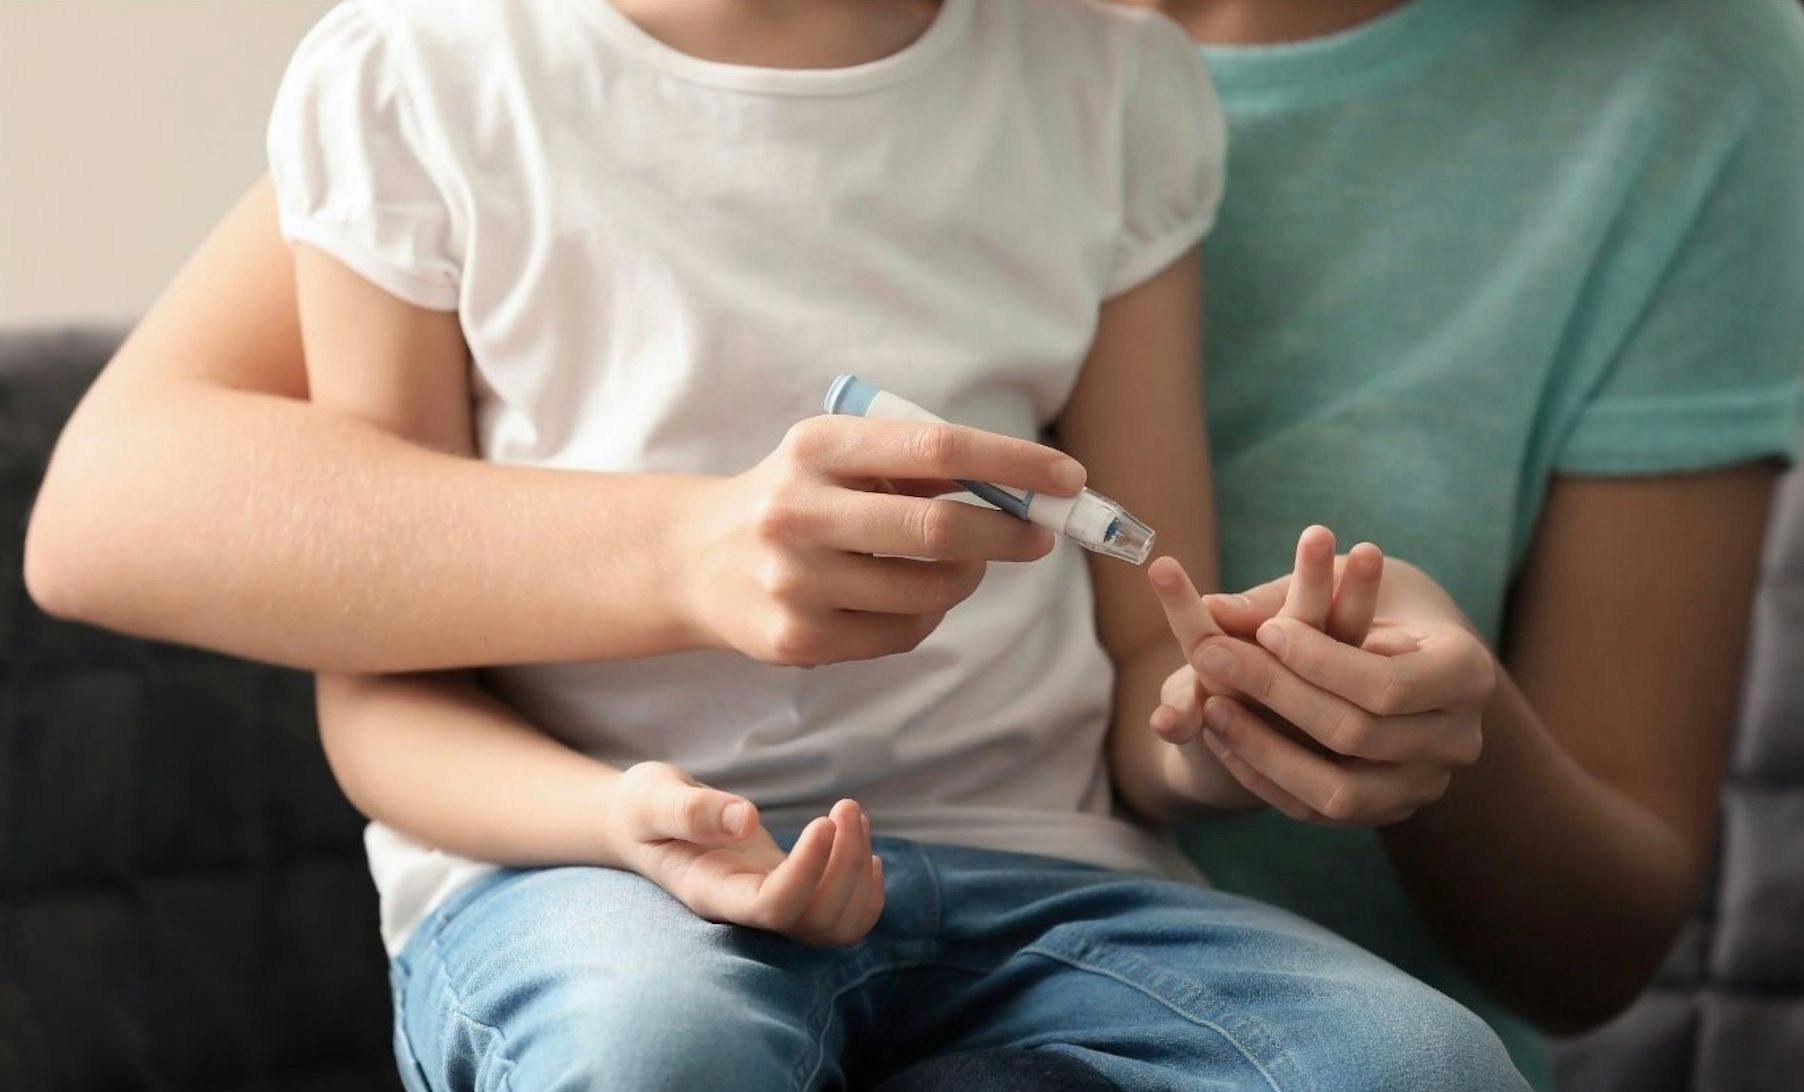 diabetic child testing blood glucose levels with lancet 